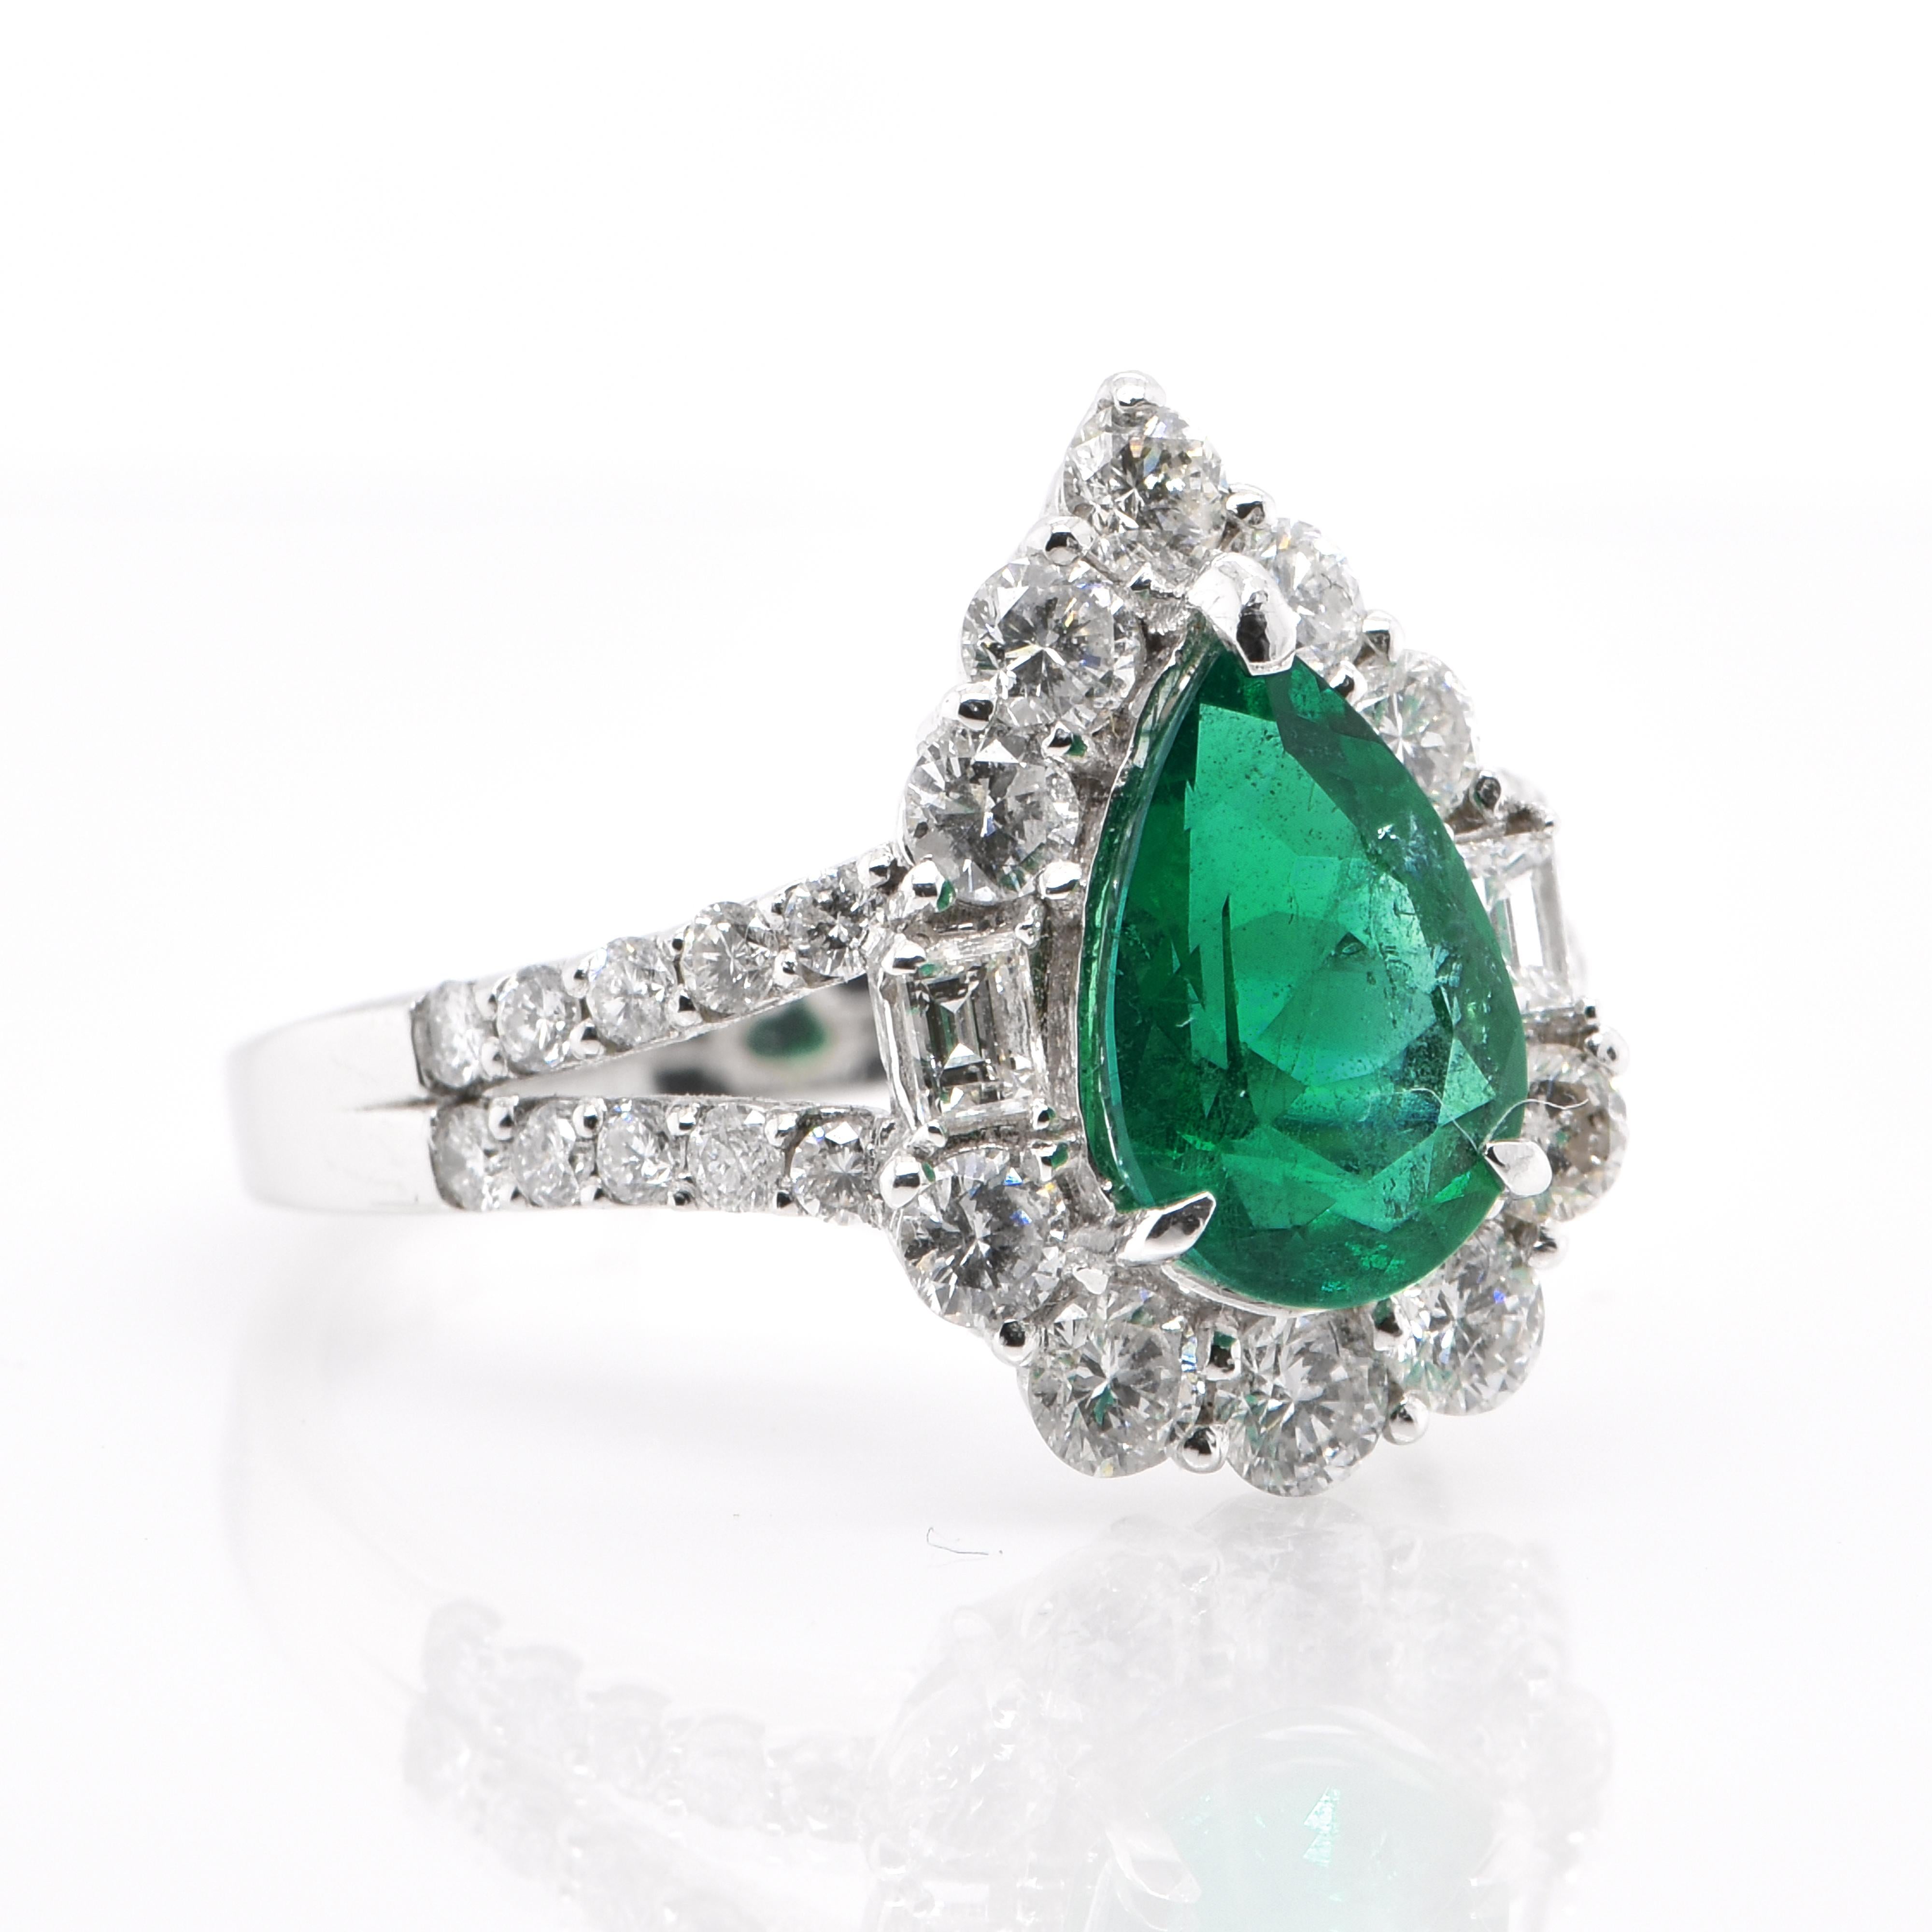 A beautiful Ring featuring a 1.64 Carat, Pear-Shape, Natural, Colombian Emerald and 1.20 Carats of Round Brilliant Diamond Accents set in Platinum. People have admired emerald’s green for thousands of years. Emeralds have always been associated with